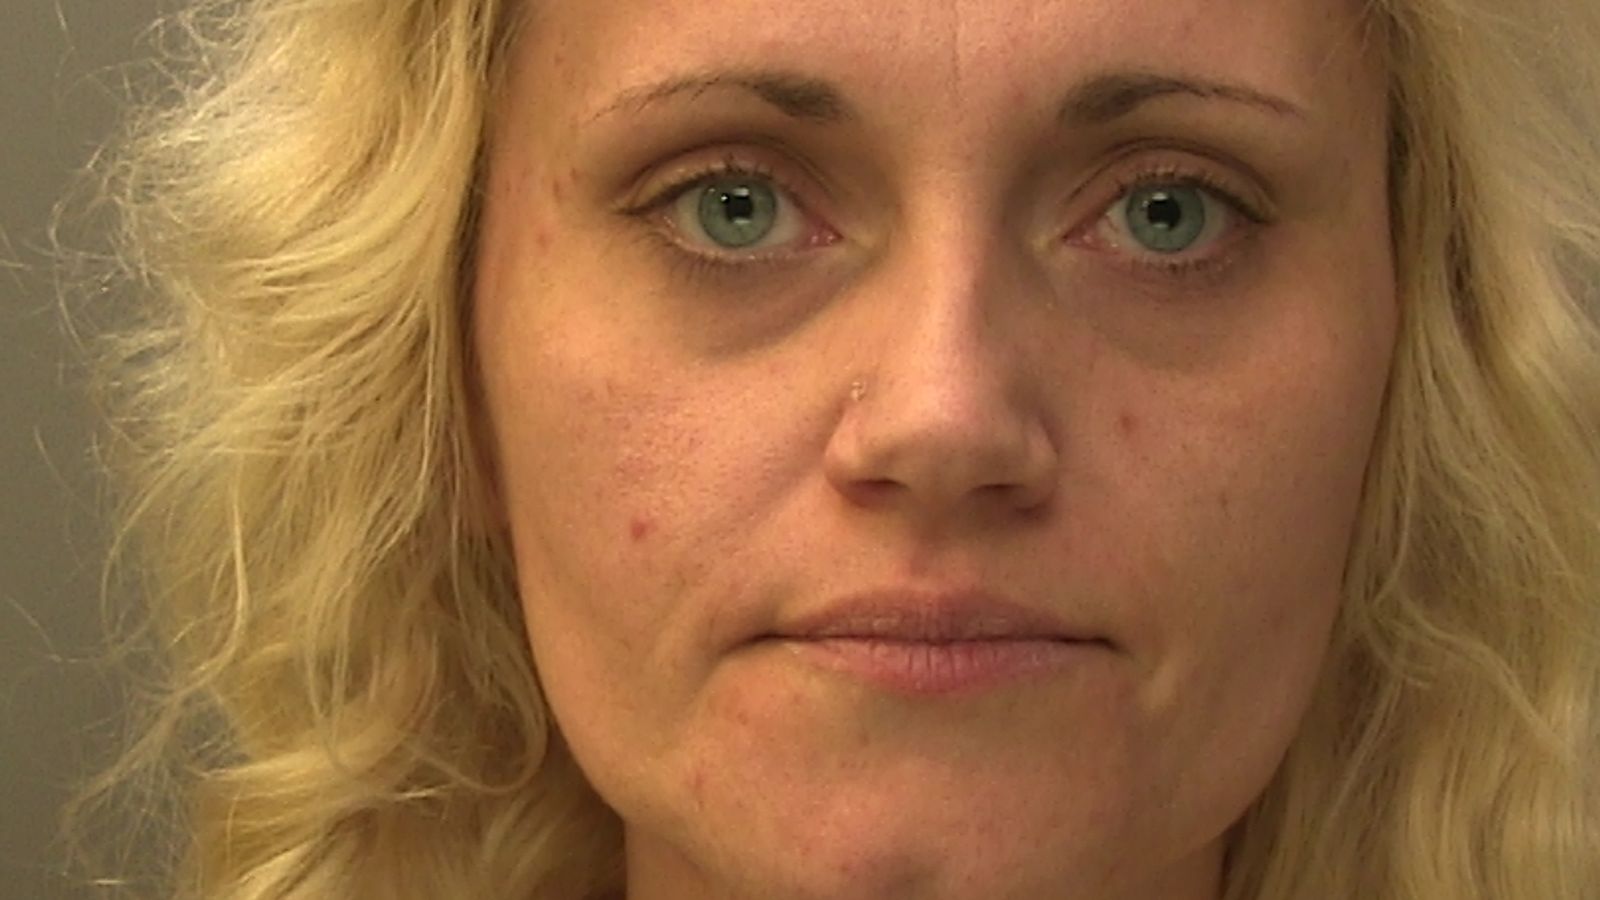 Wallace And Gromit stamps led to arrest of woman jailed for trying to frame ex-husband